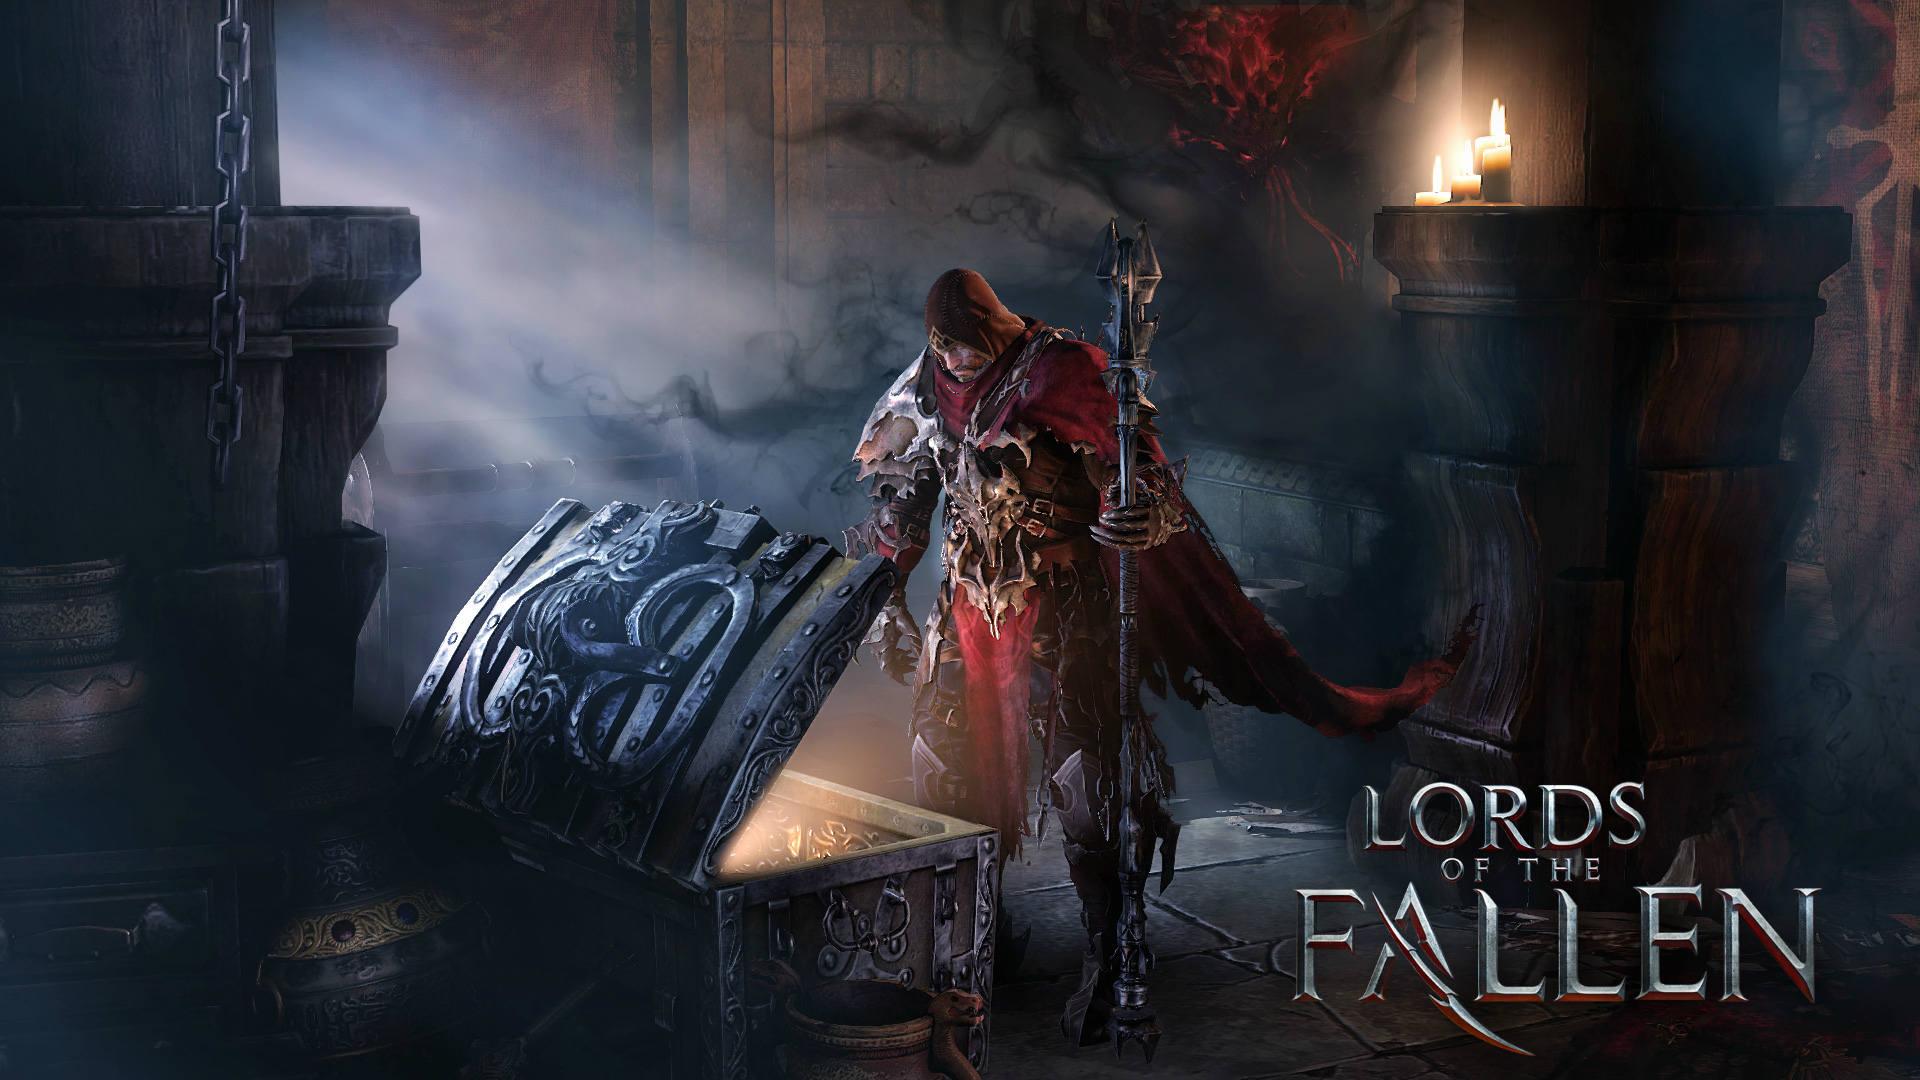 The Lords of the Fallen Wallpaper 8K #5241i